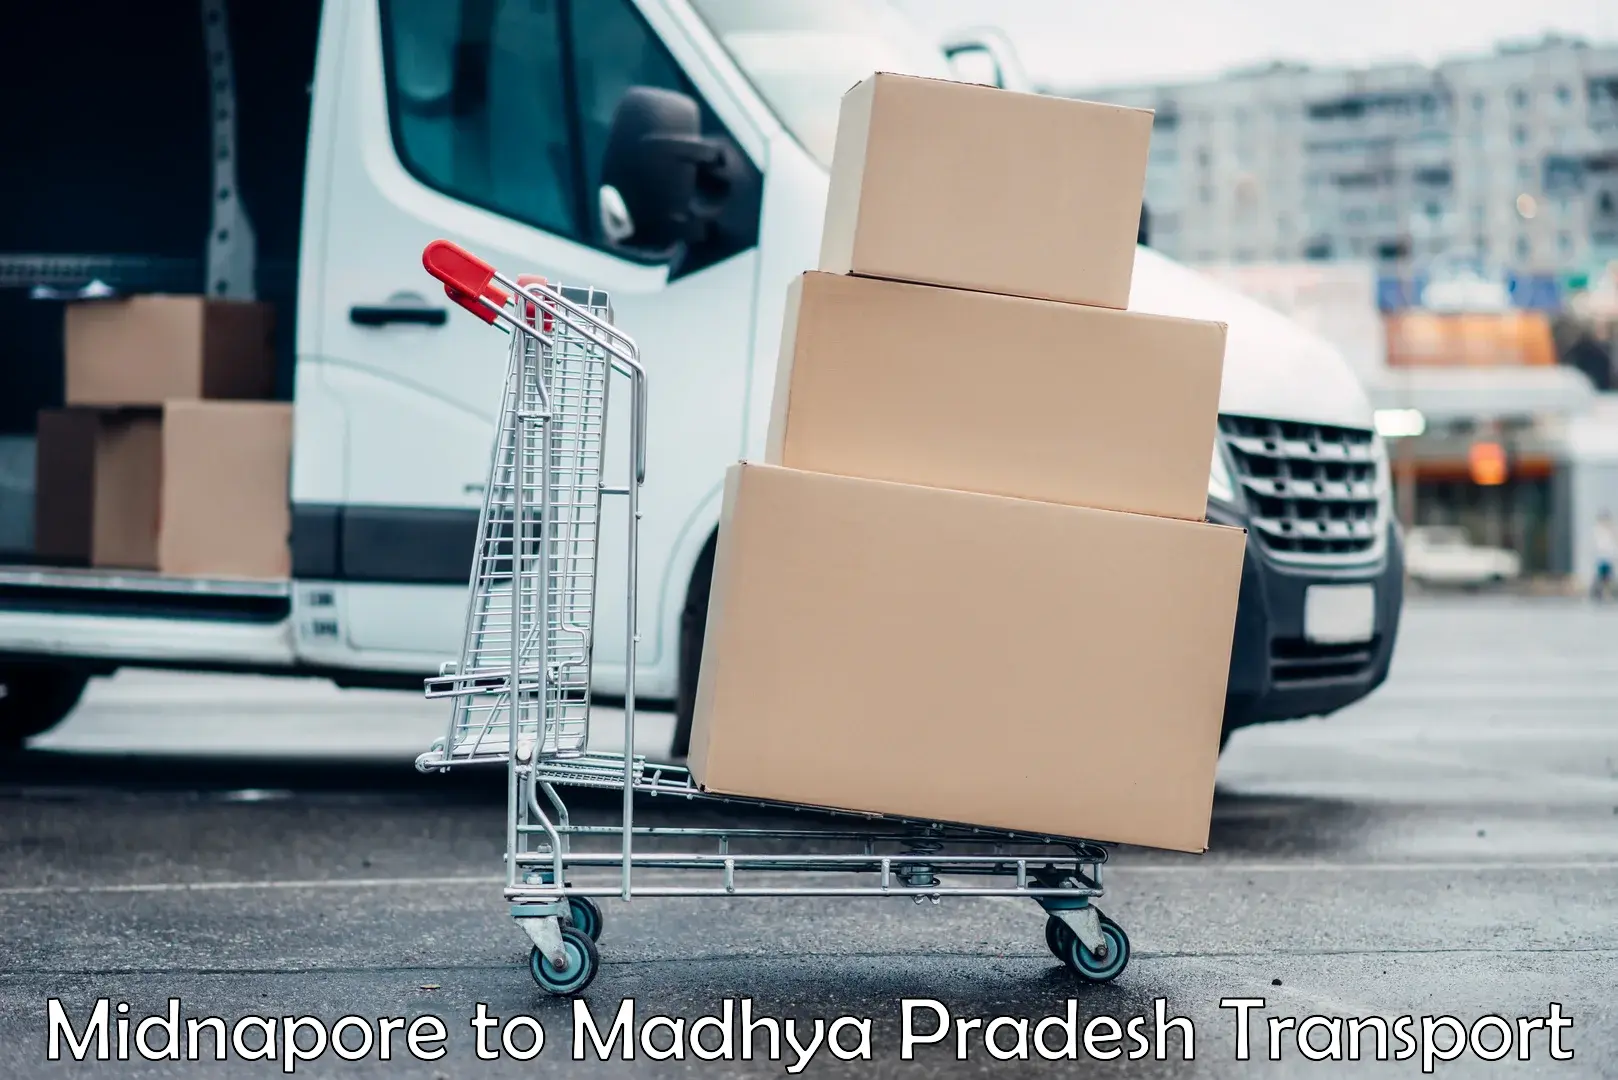 Vehicle transport services Midnapore to Chhindwara